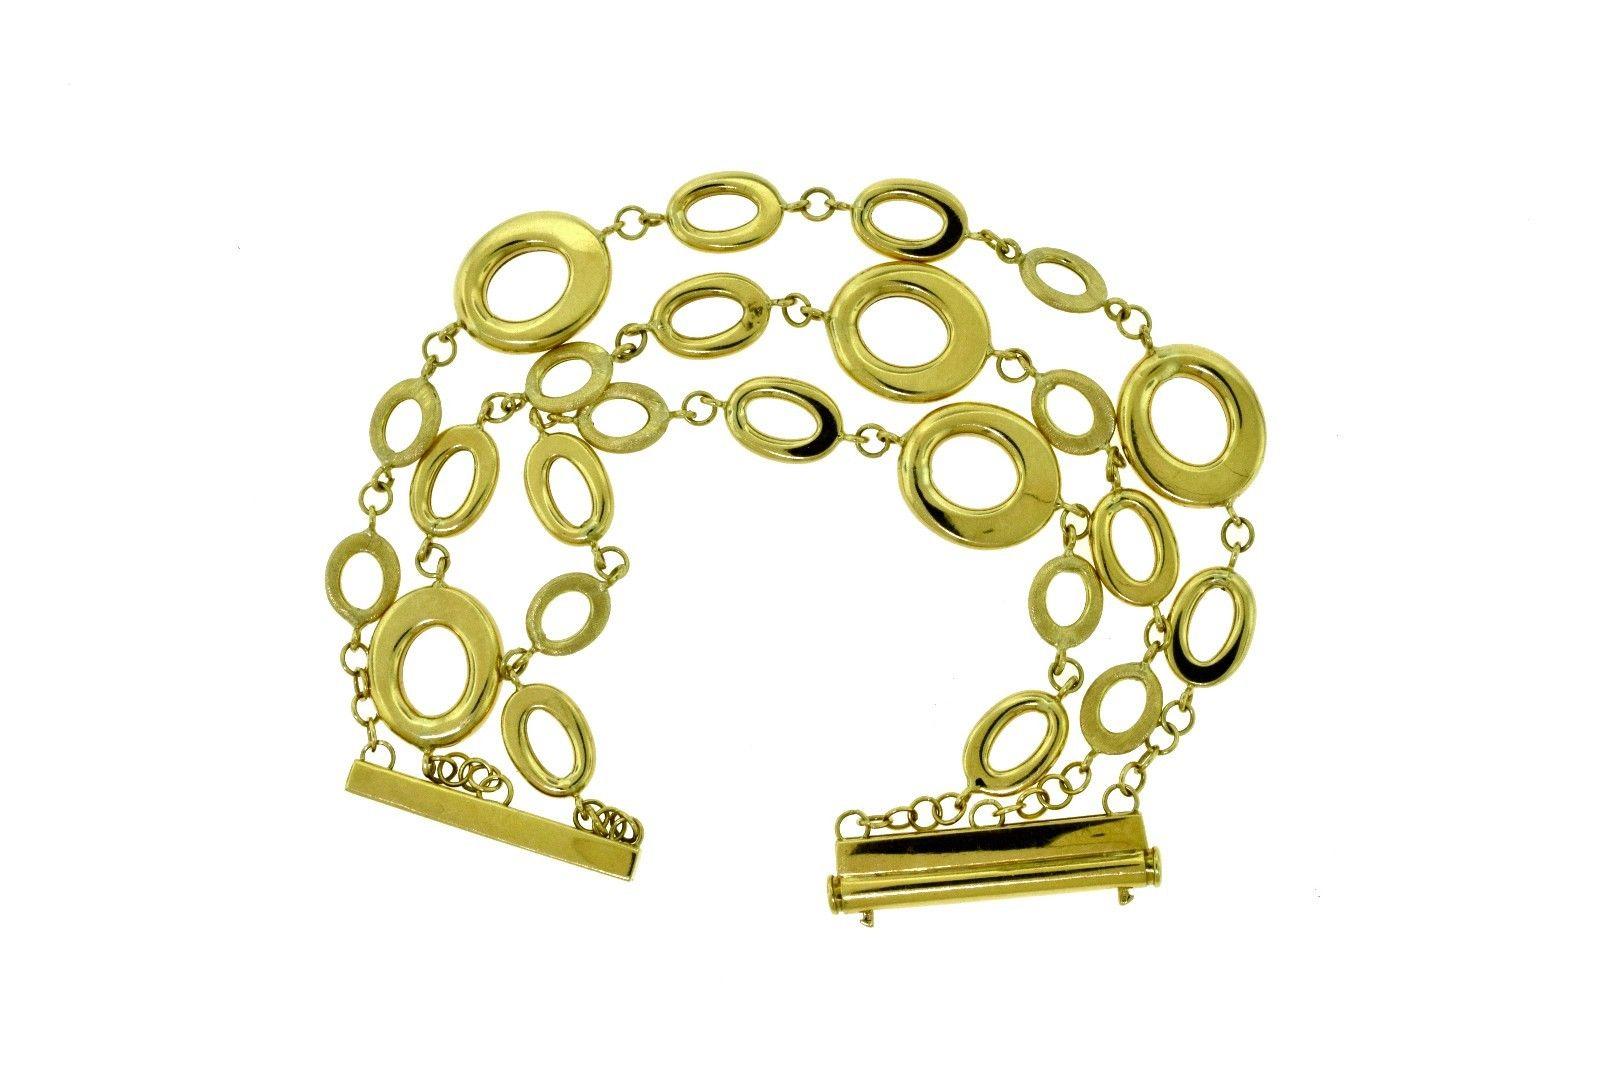 Contempo 18k Yellow Gold Elipse Chain Link Bracelet In Good Condition For Sale In Miami, FL